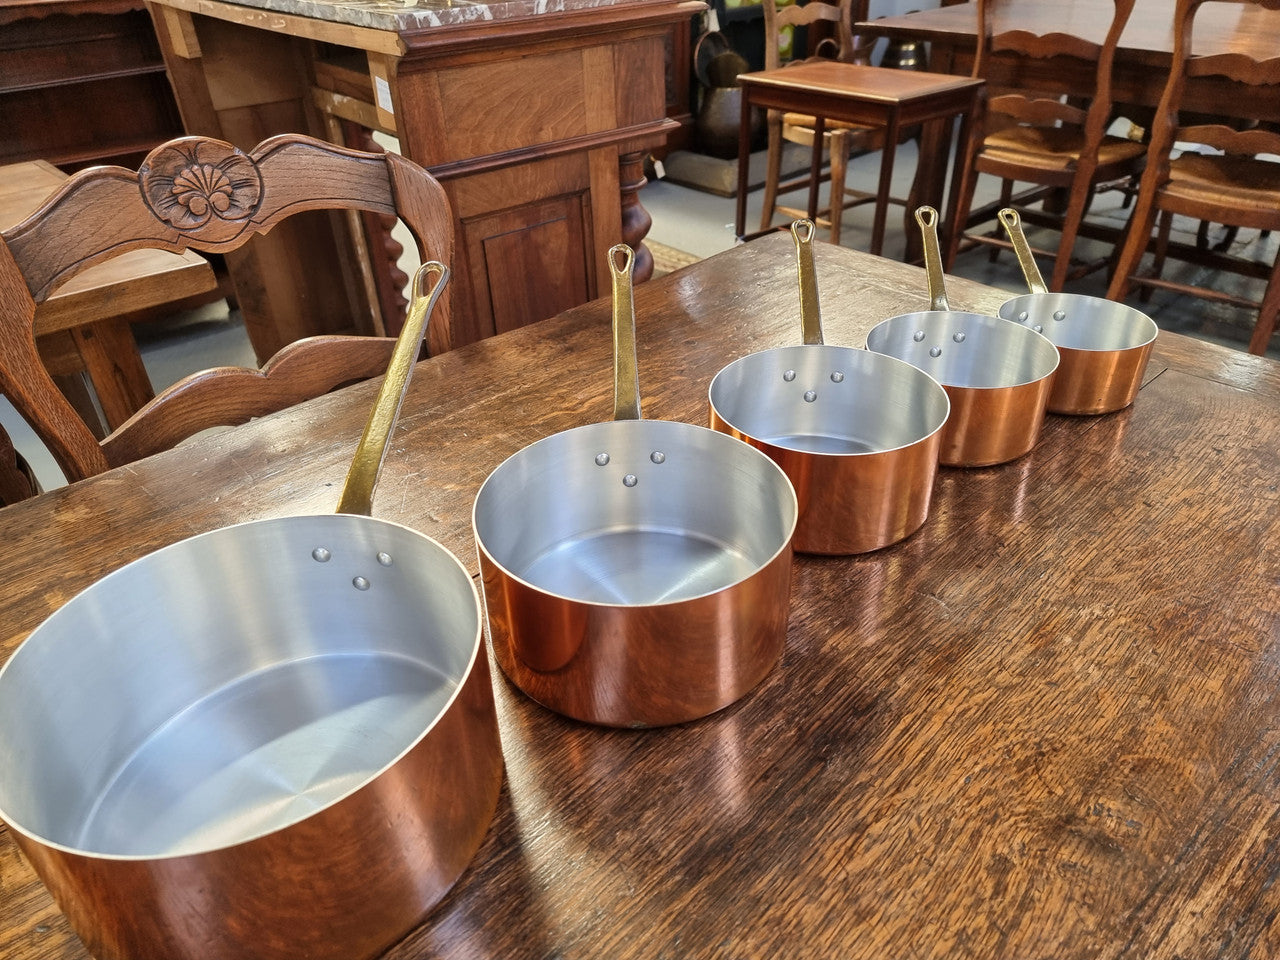 Set of Five French Vintage Copper & Brass Saucepans. They are in amazing original condition.